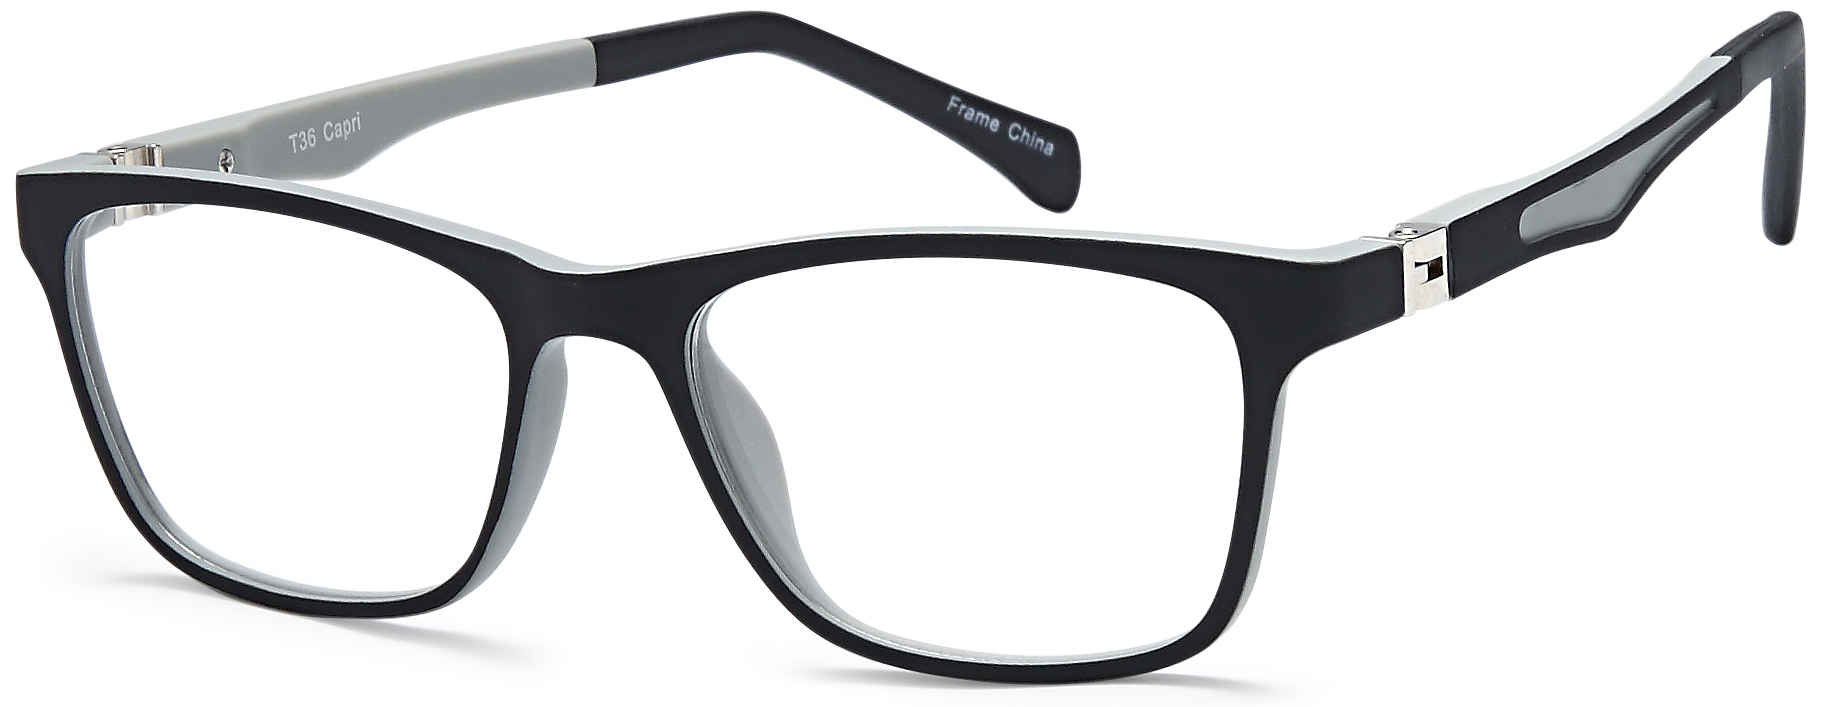 Picture of Trendy Eyeglasses T36